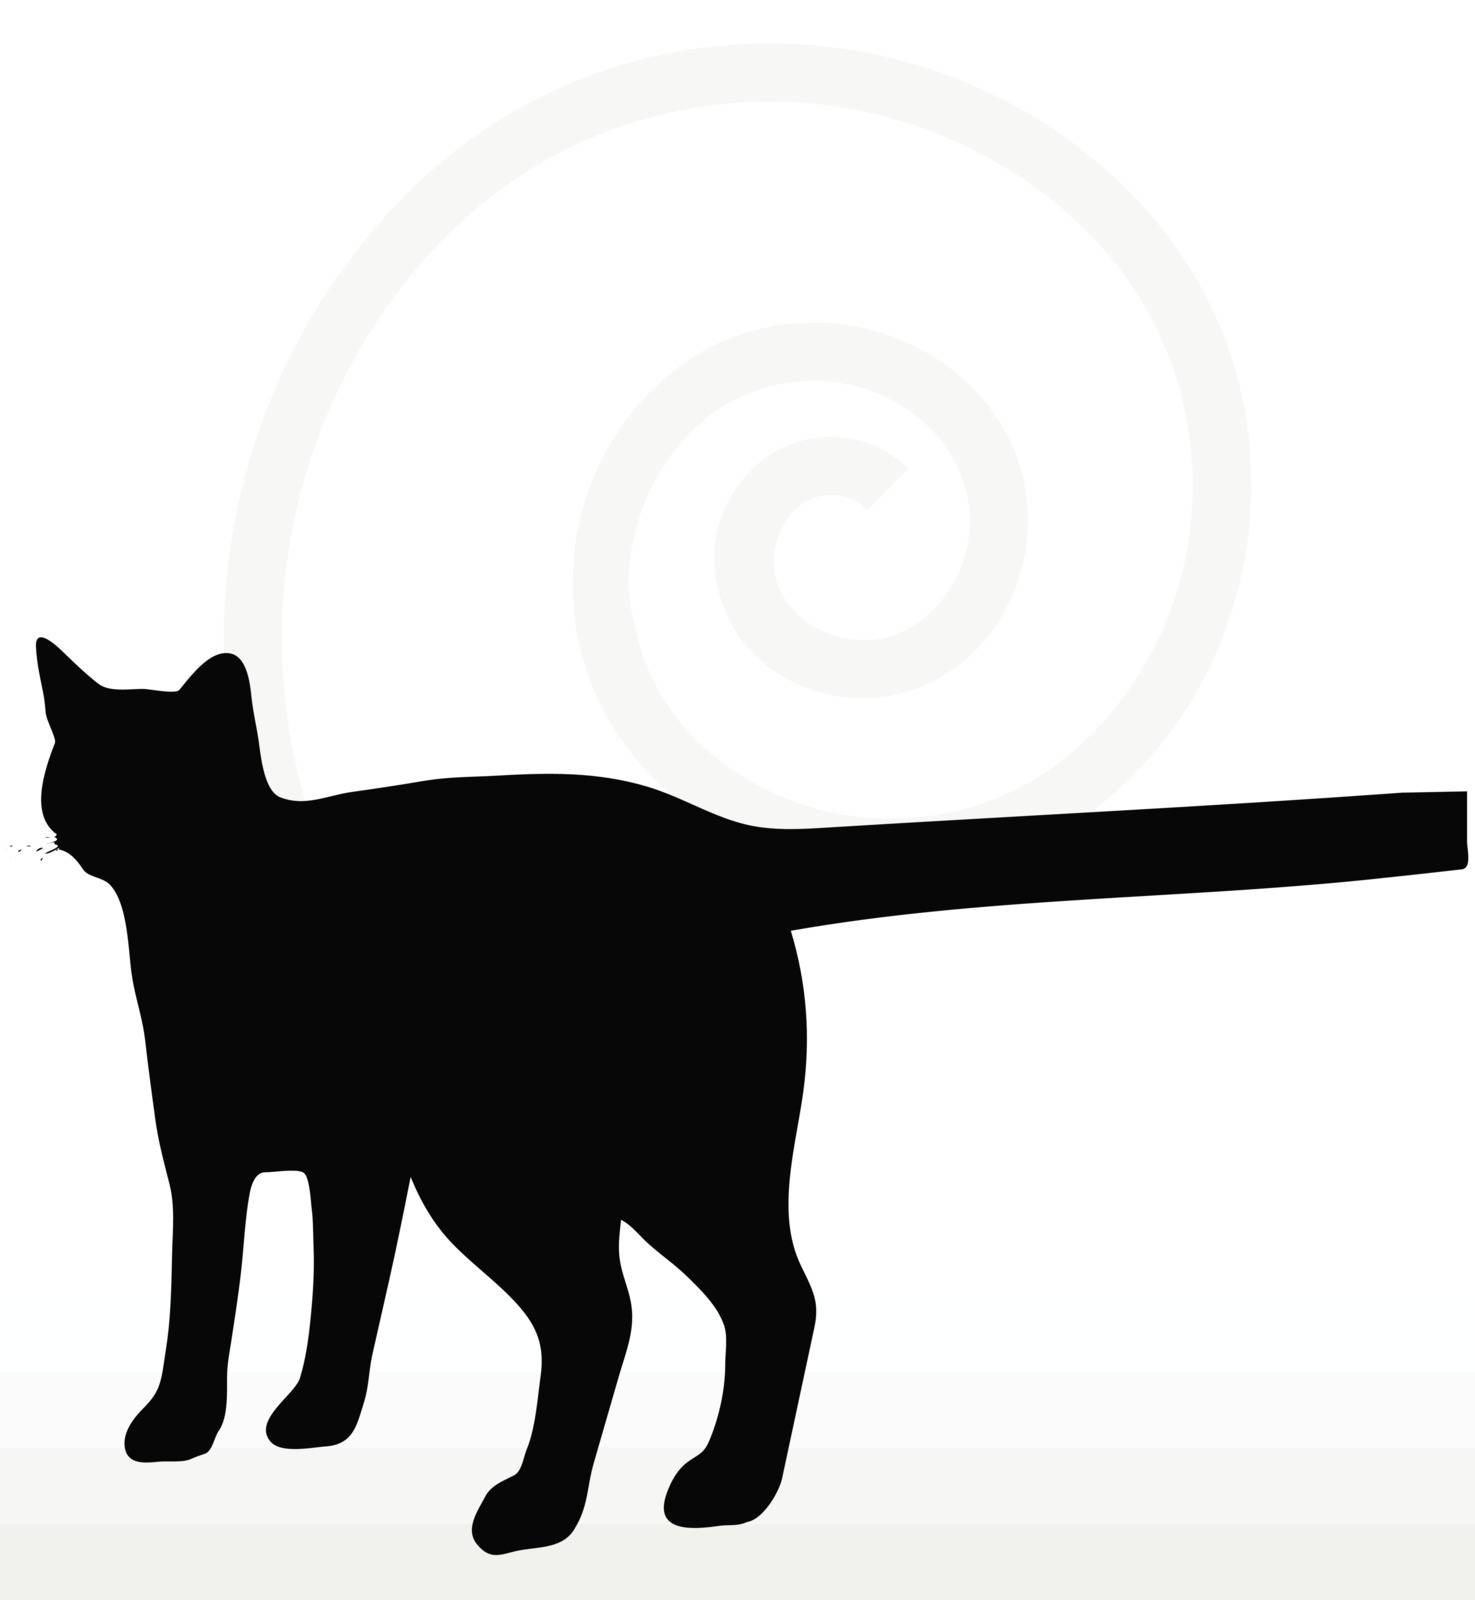 Vector Image - cat silhouette in standing pose isolated on white background
